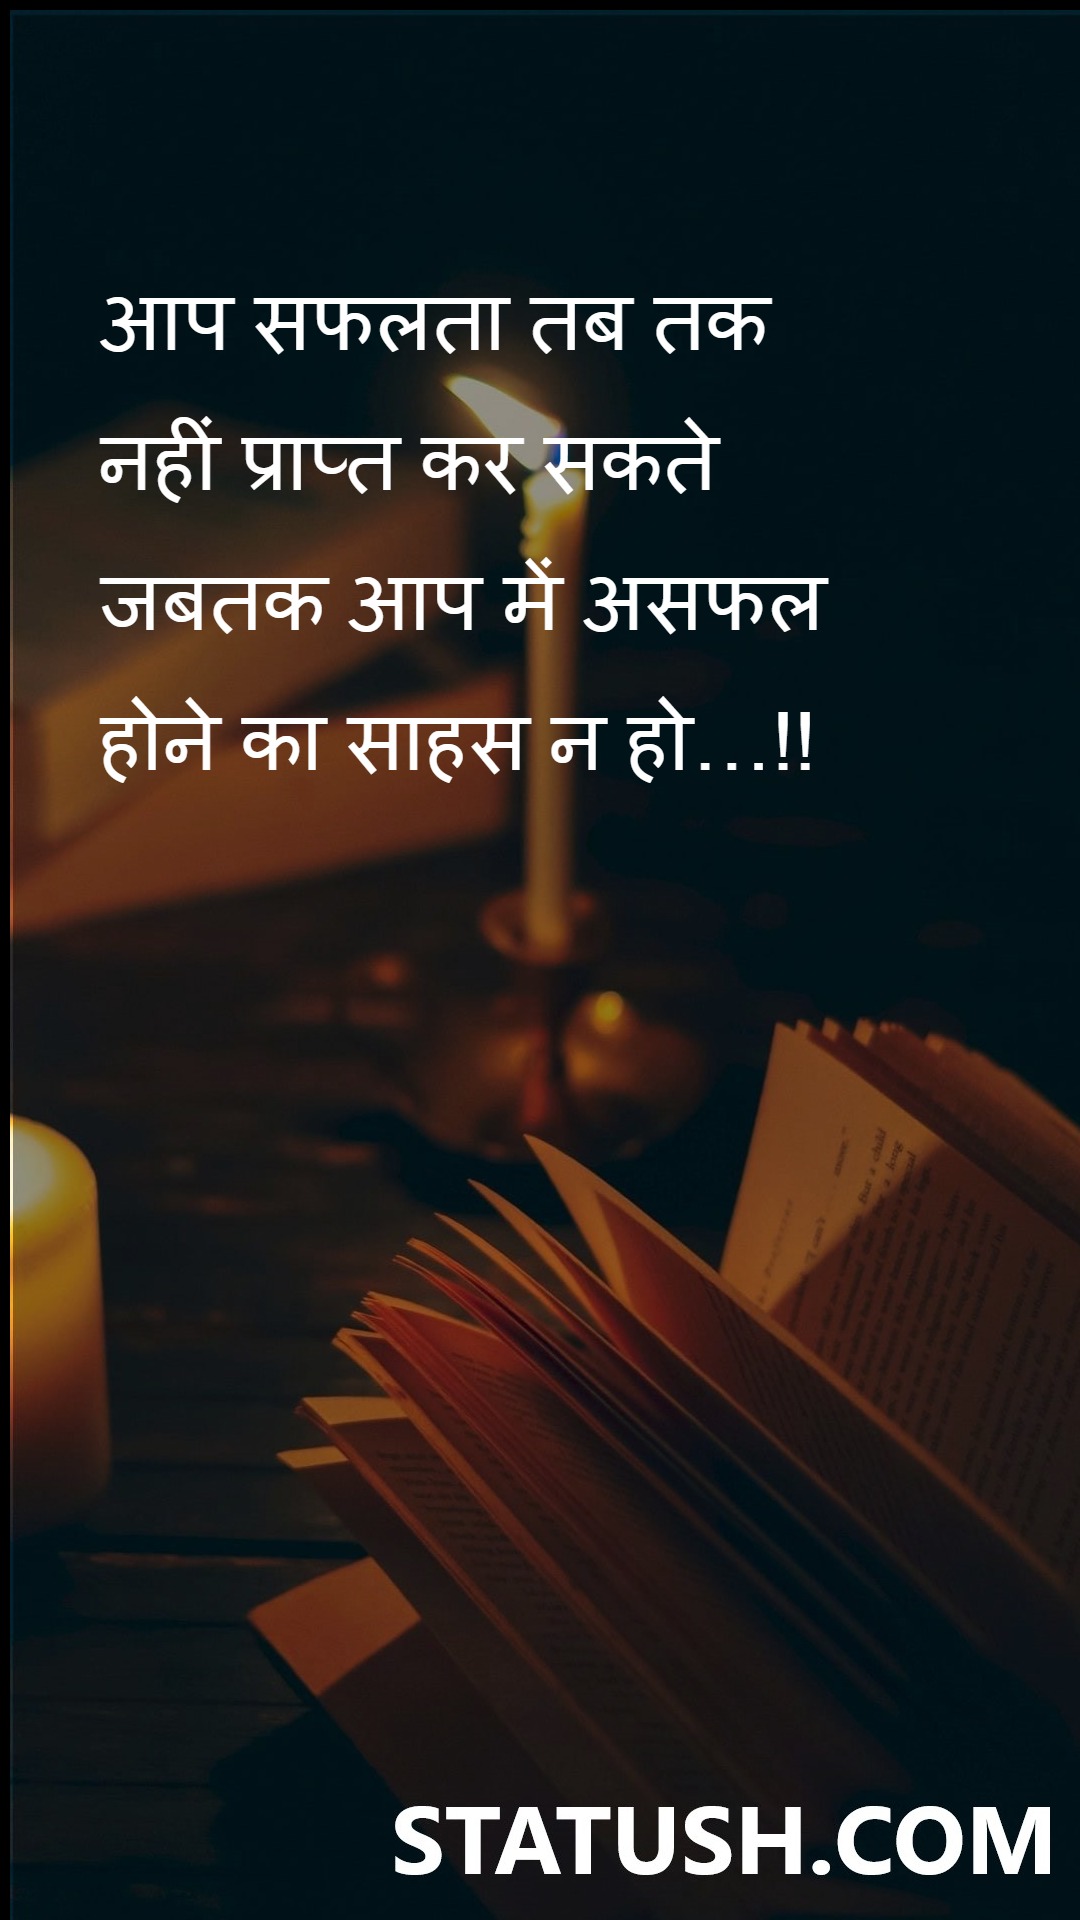 You cannot achieve success - Hindi Quotes at statush.com